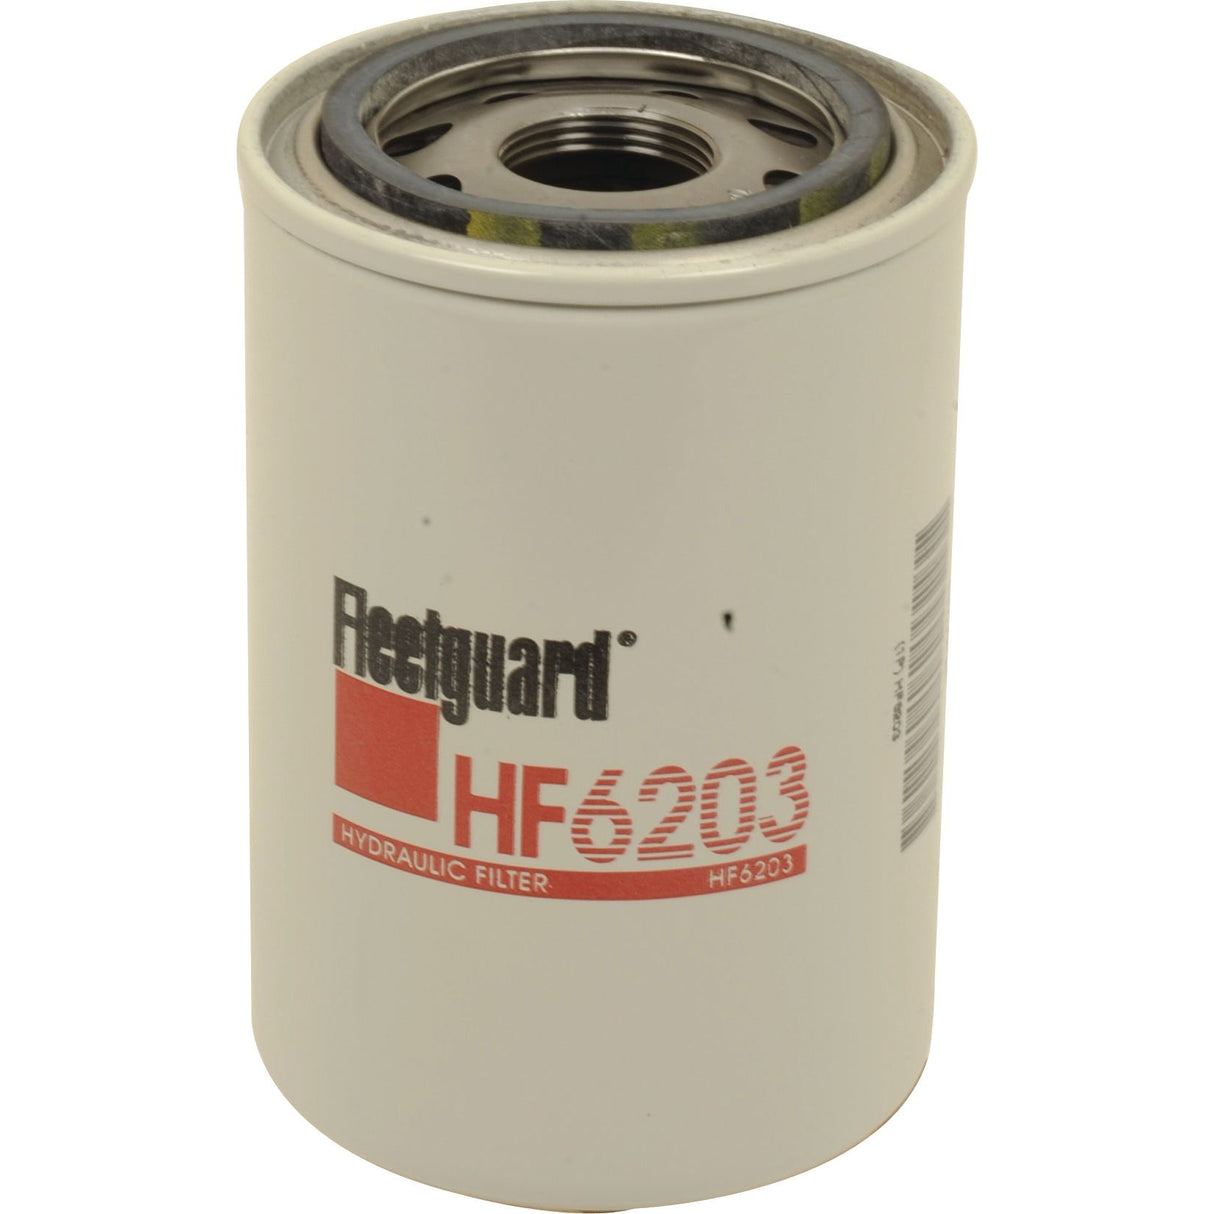 Hydraulic Filter - Spin On - HF6203
 - S.76536 - Farming Parts